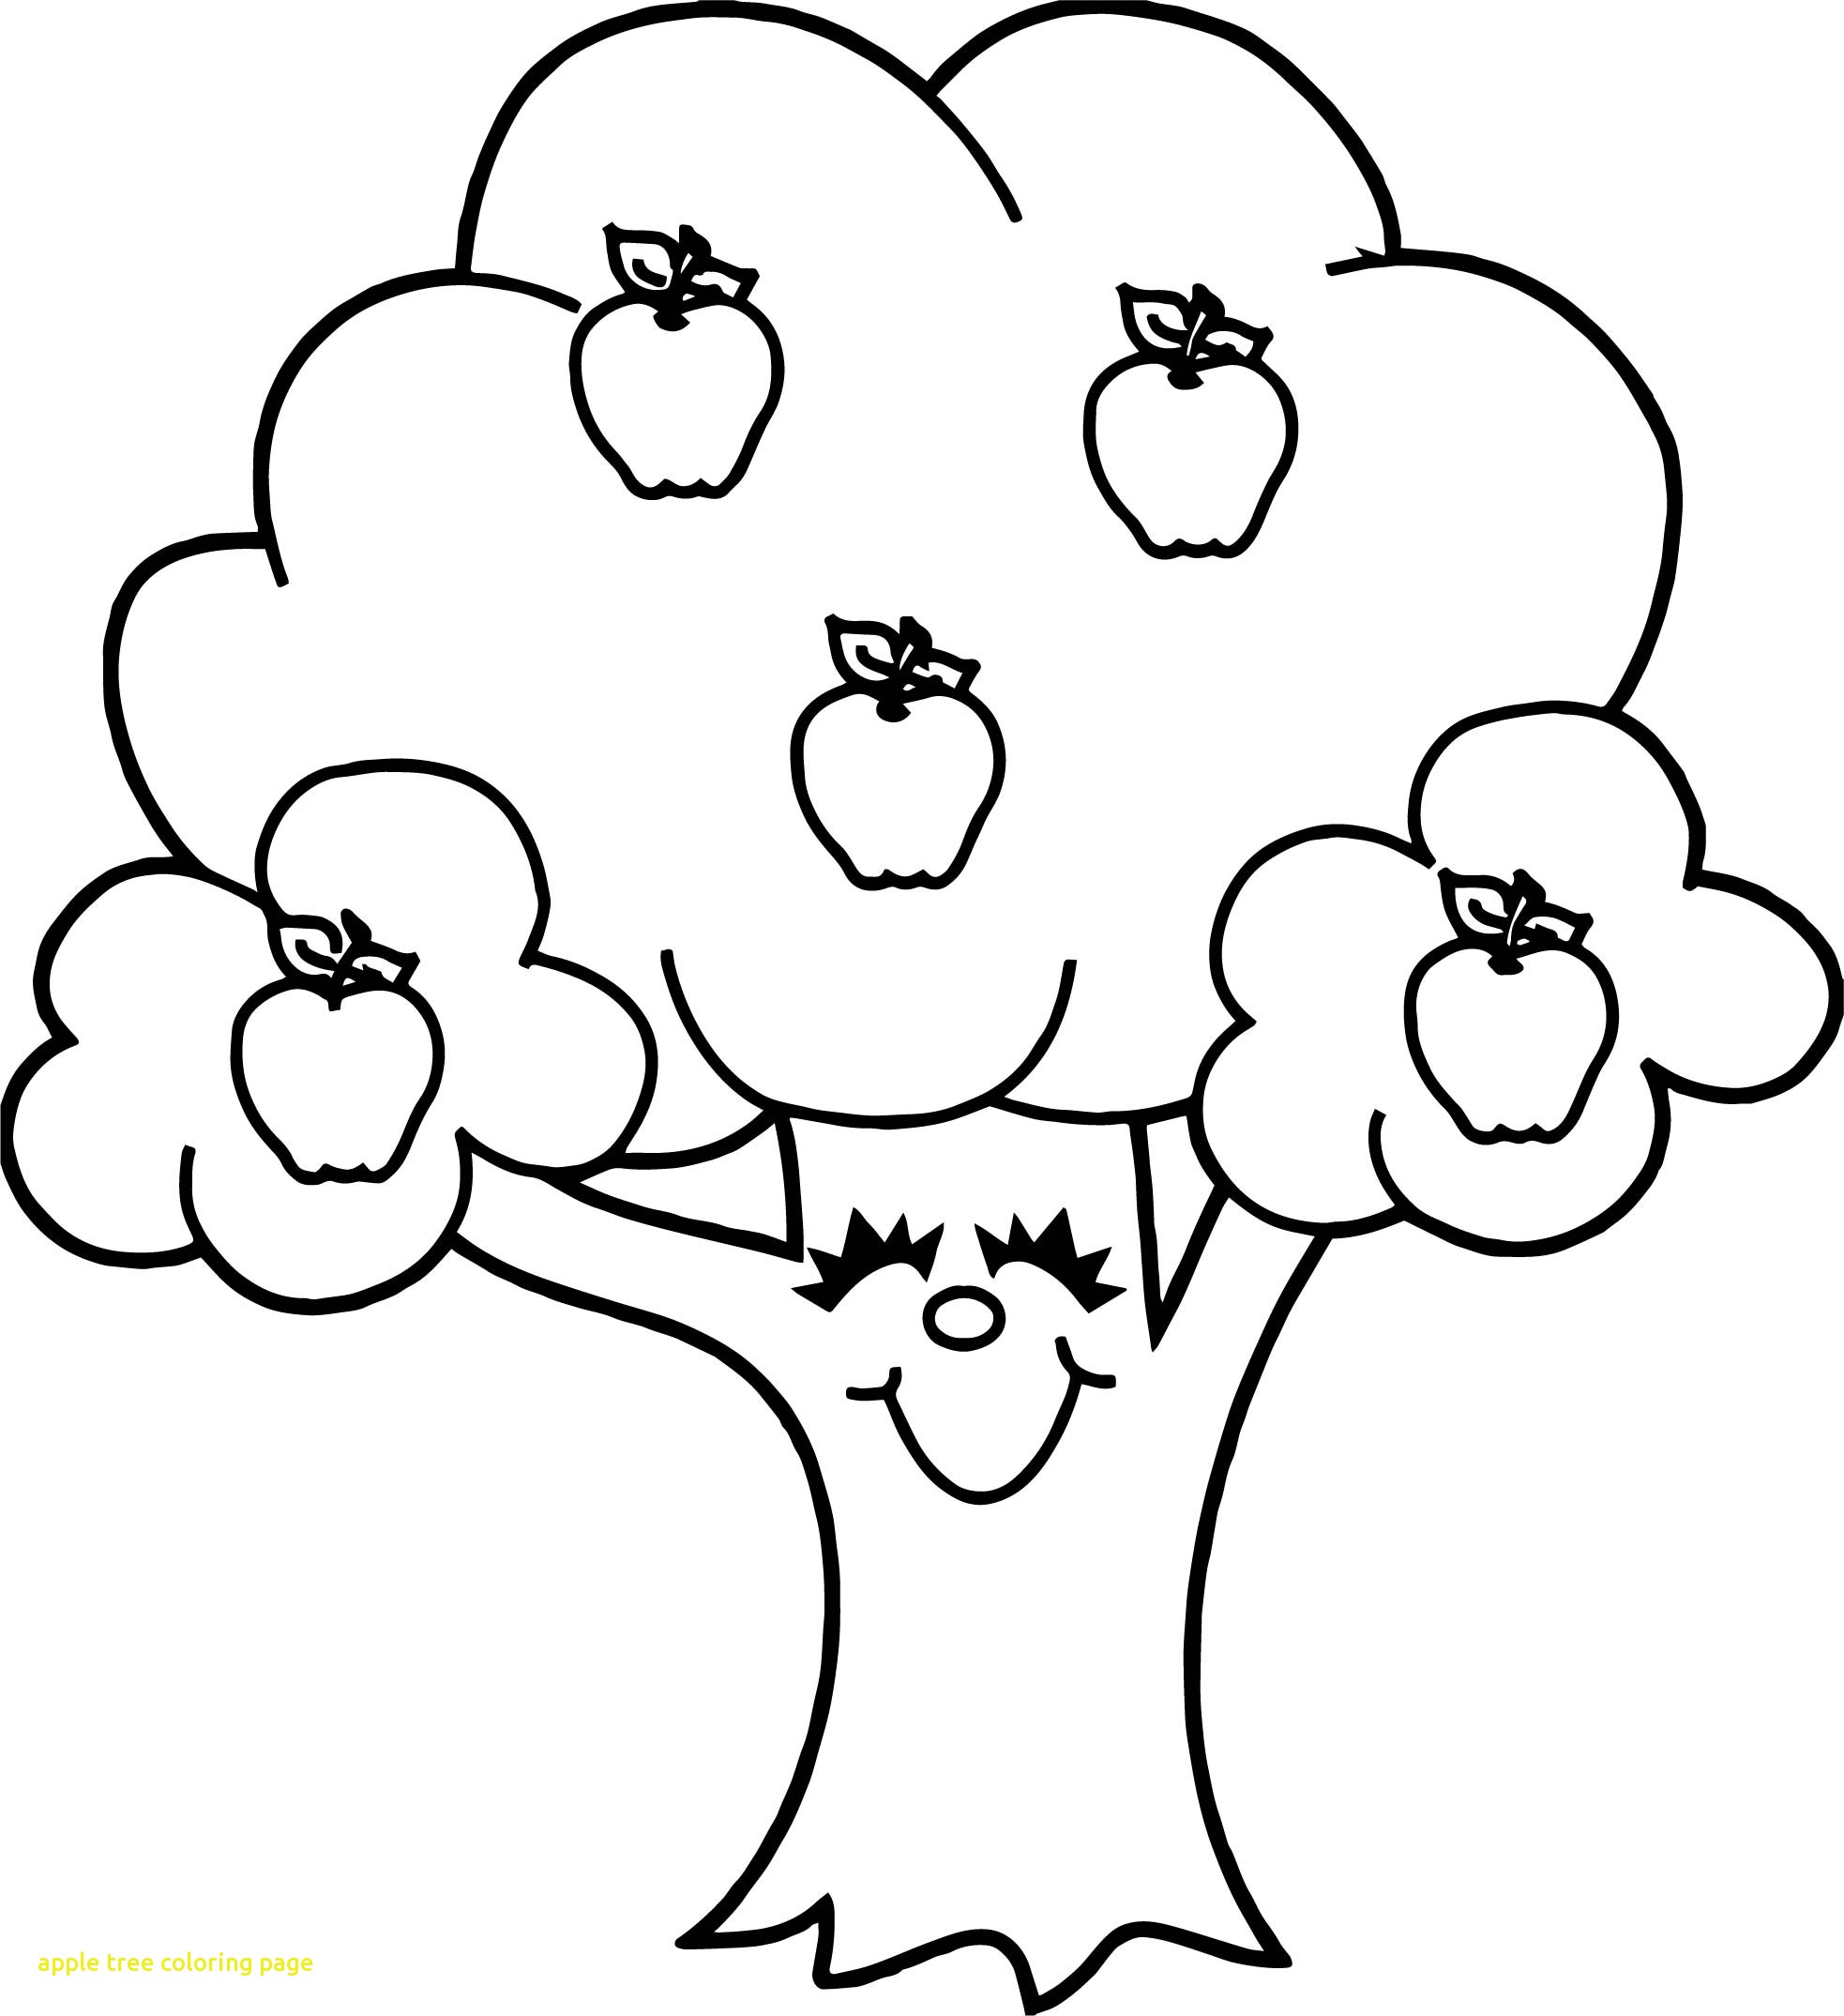 Cute Apple Tree Coloring Page - Free Printable Coloring Pages for Kids